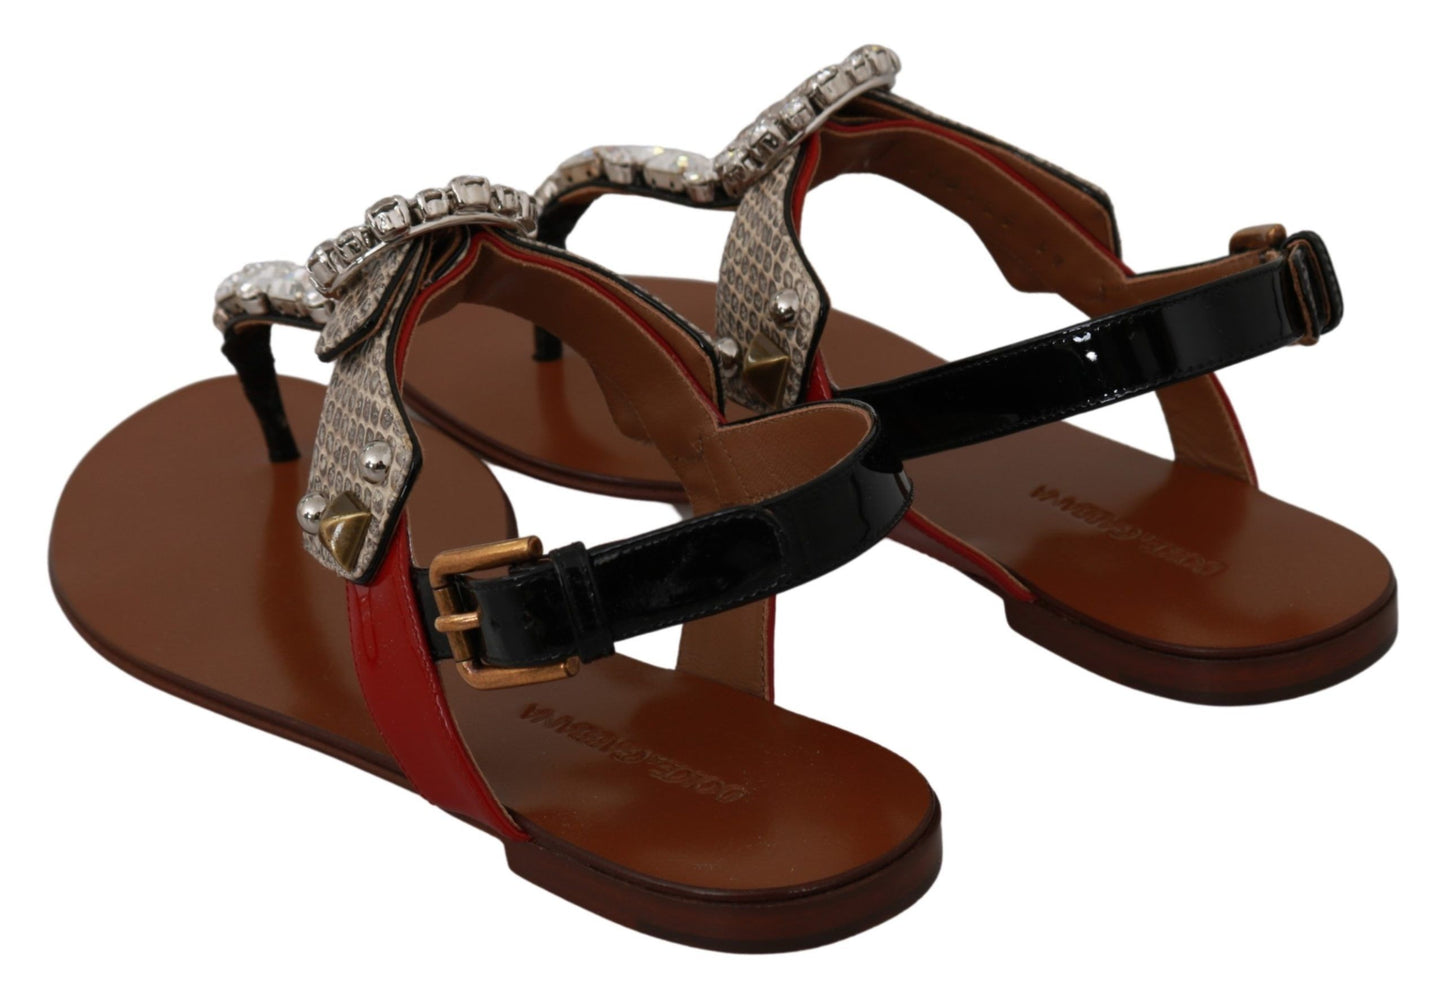 Elegant Strappy Sandals with Exotic Charm